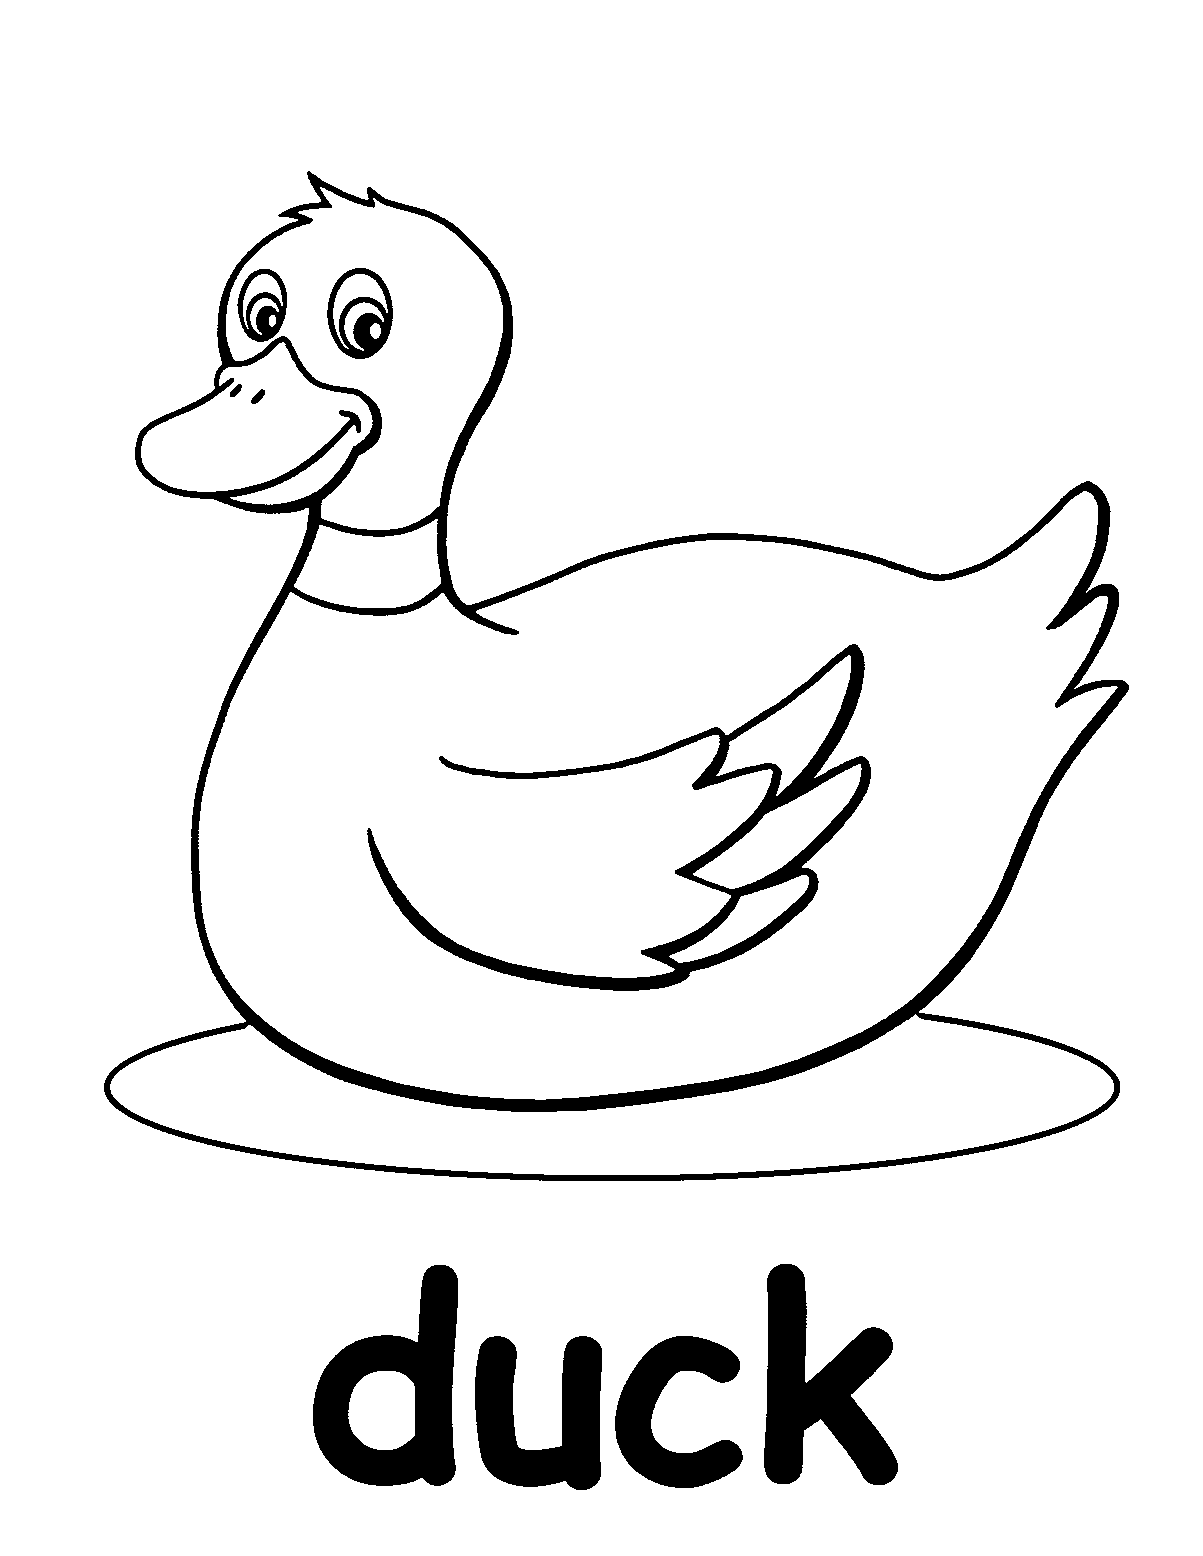 coloring sheet duck printable duck coloring pages for kids cool2bkids duck coloring sheet 